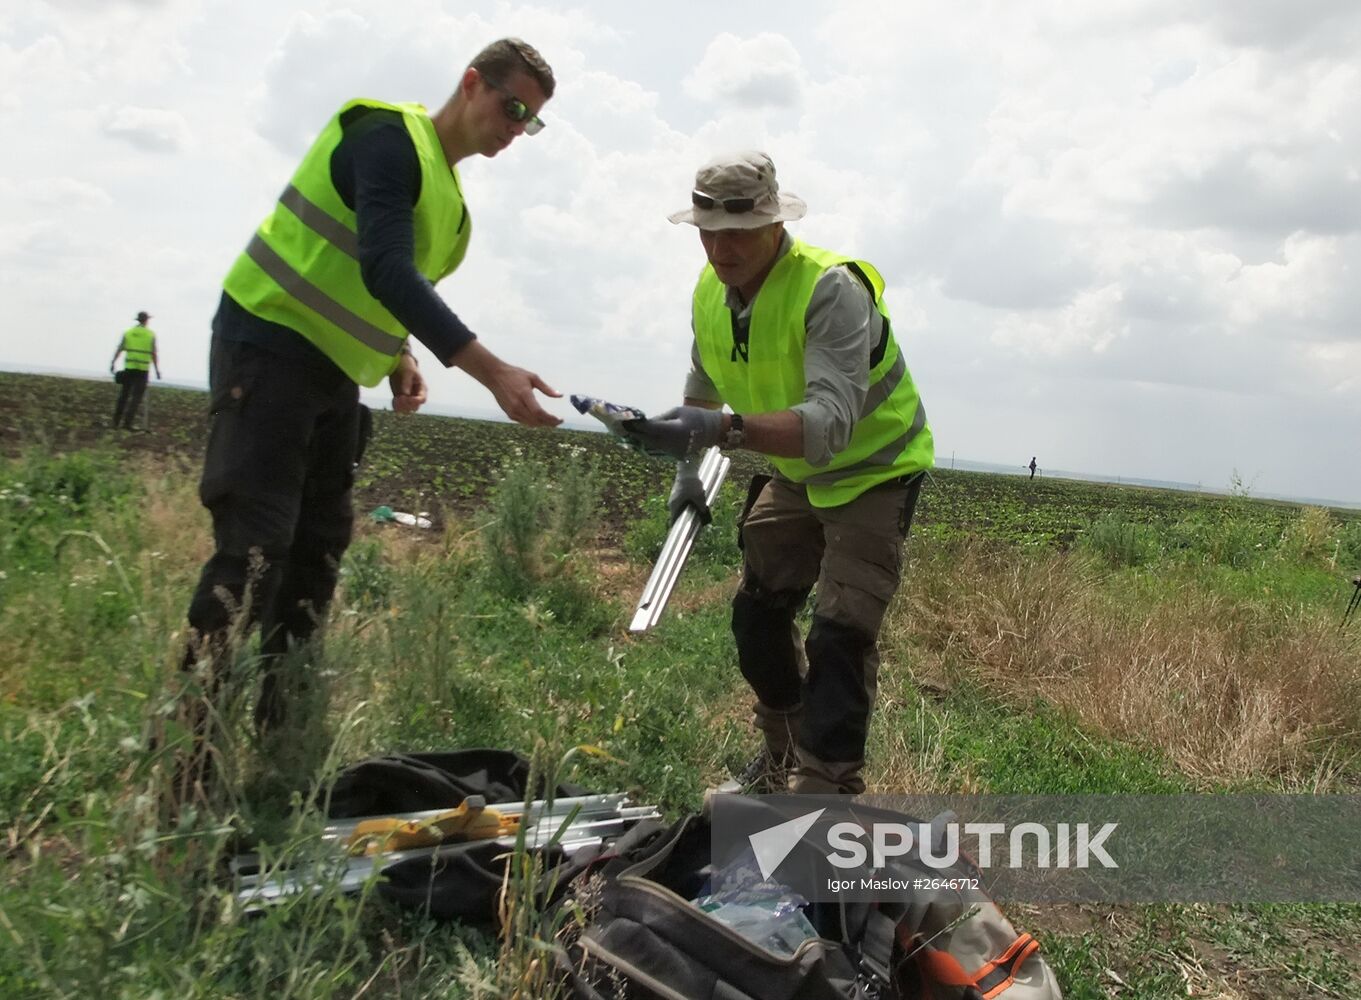 International experts arrive in Donetsk to investigate Malaysian MH17 Boeing crash